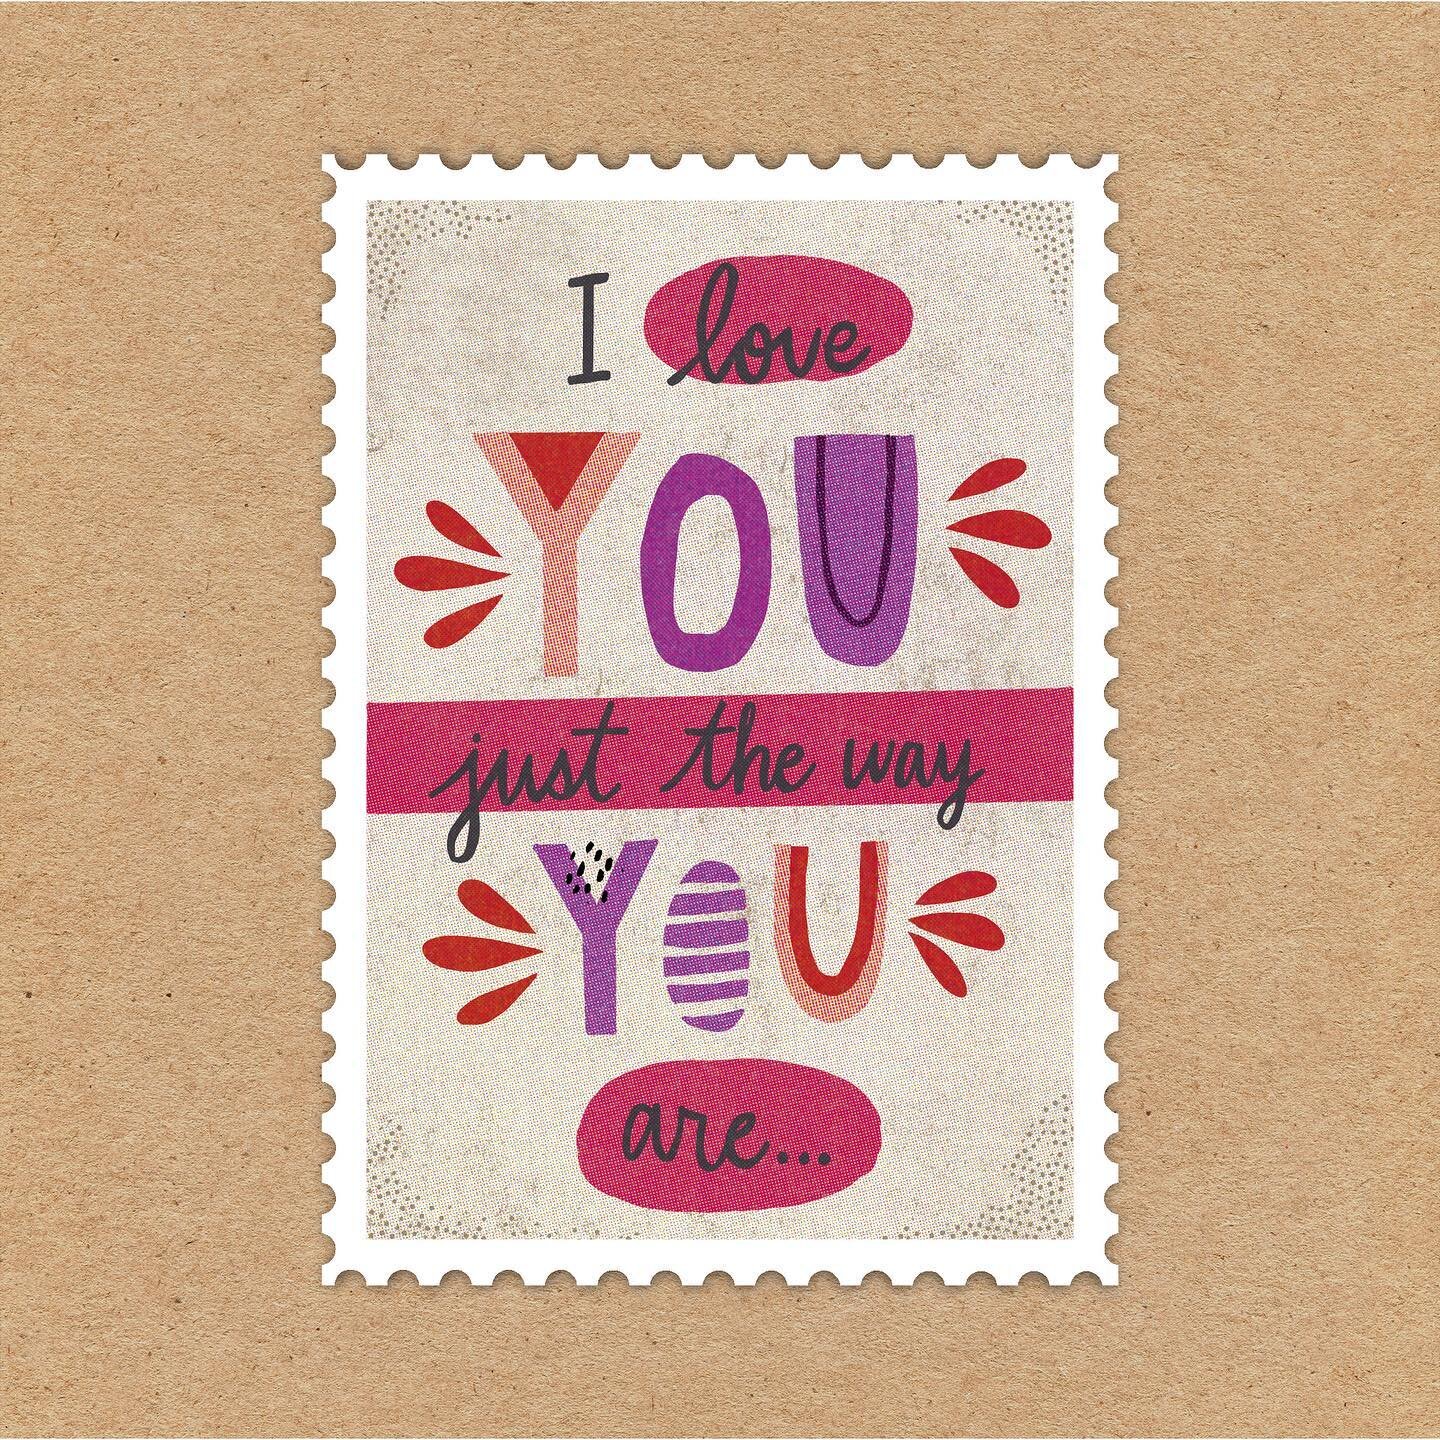 I know, it&rsquo;s been forever since I&rsquo;ve posted here. 

But le hubby gave me an adorable card and I really wanted to capture this sweet gesture by illustrating it as a stamp. @jakegeephoto